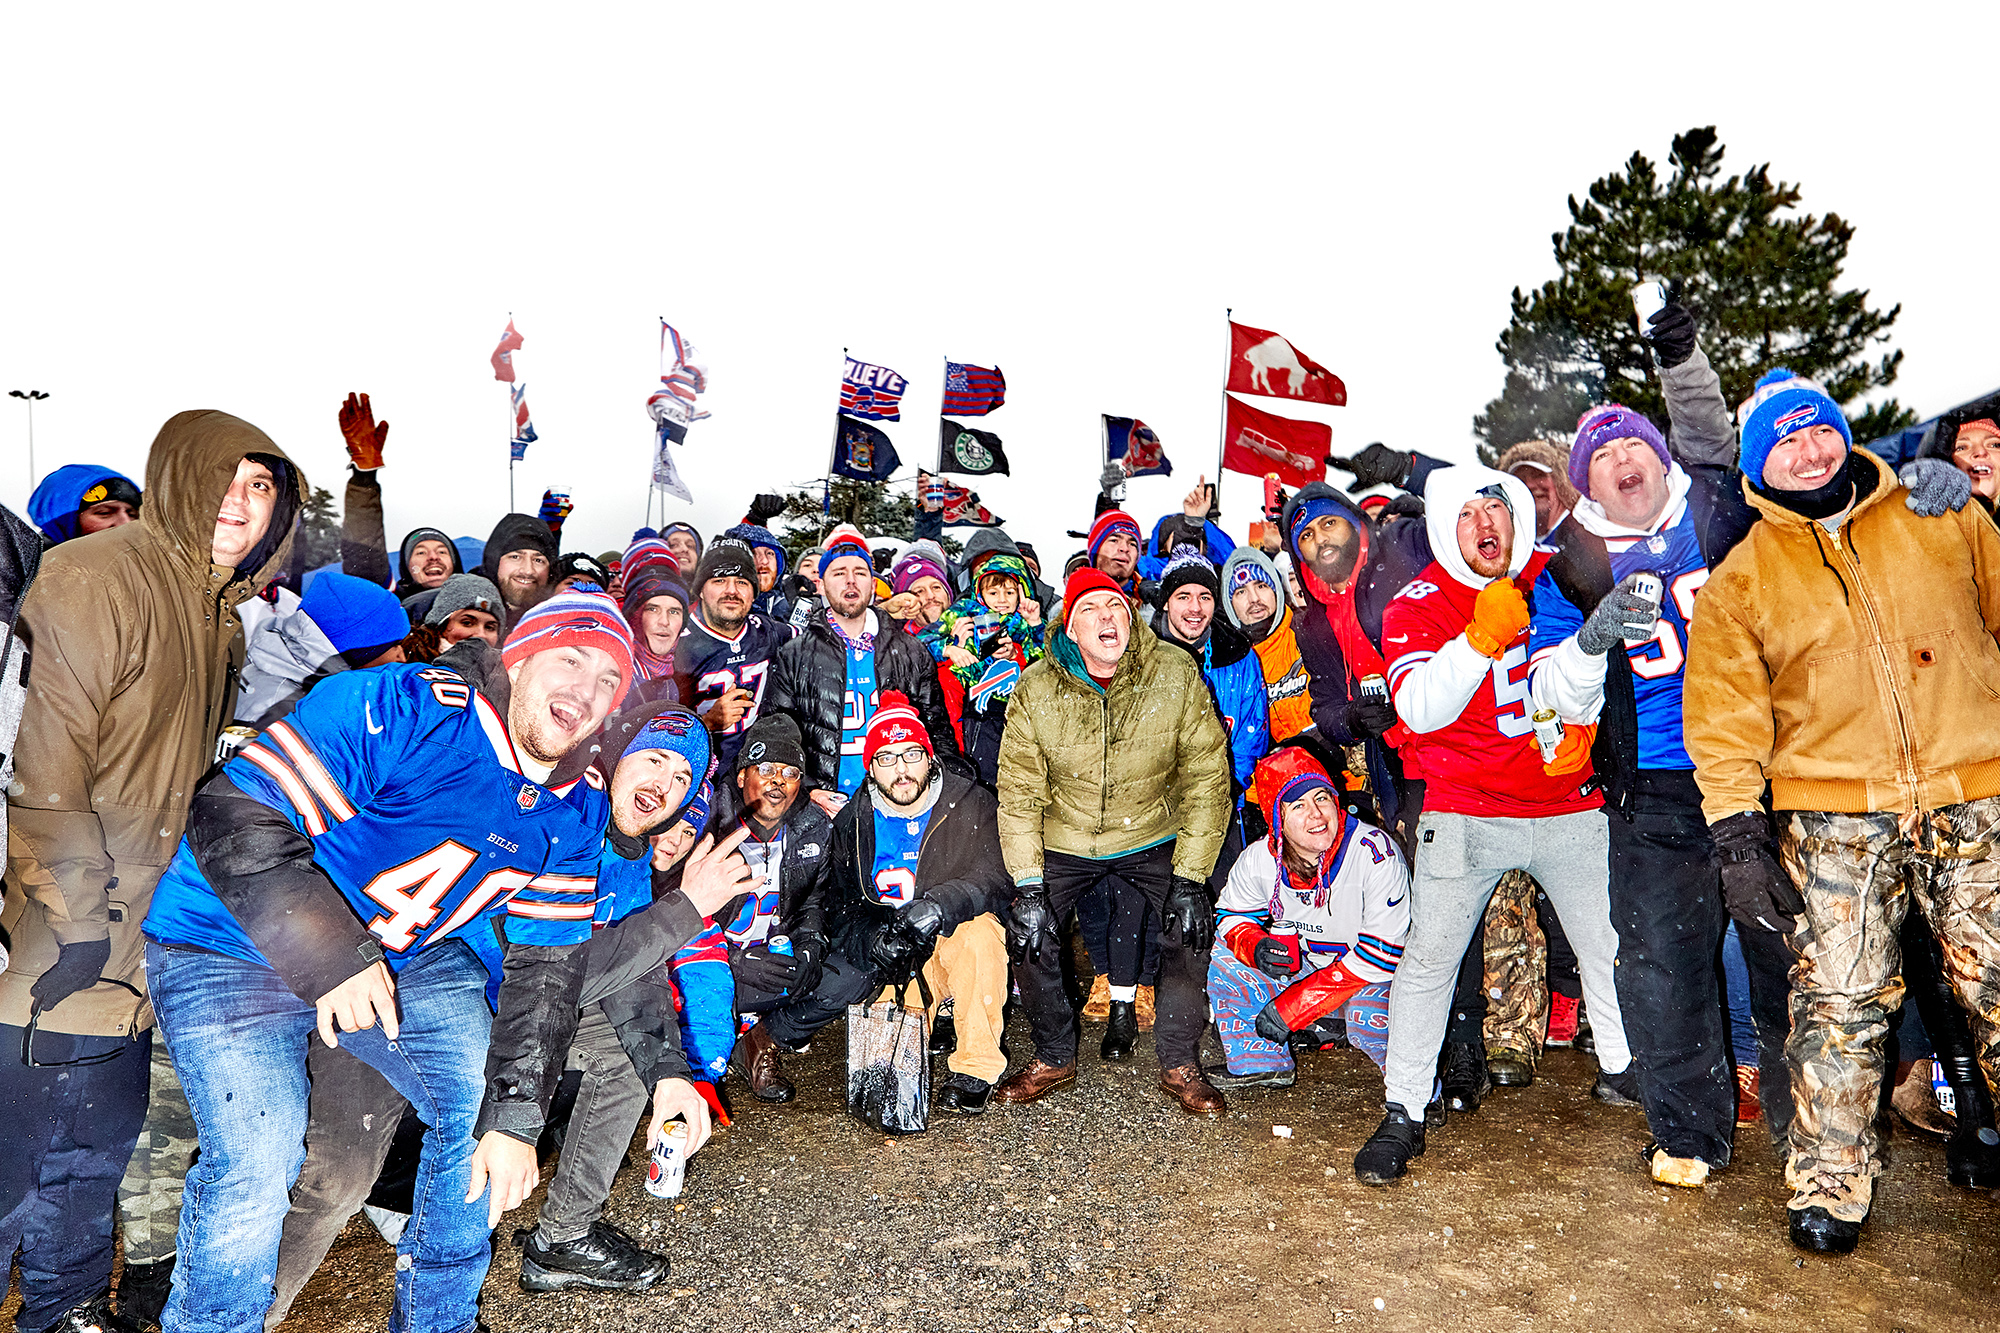 A group of Bills fans pose for a photo.